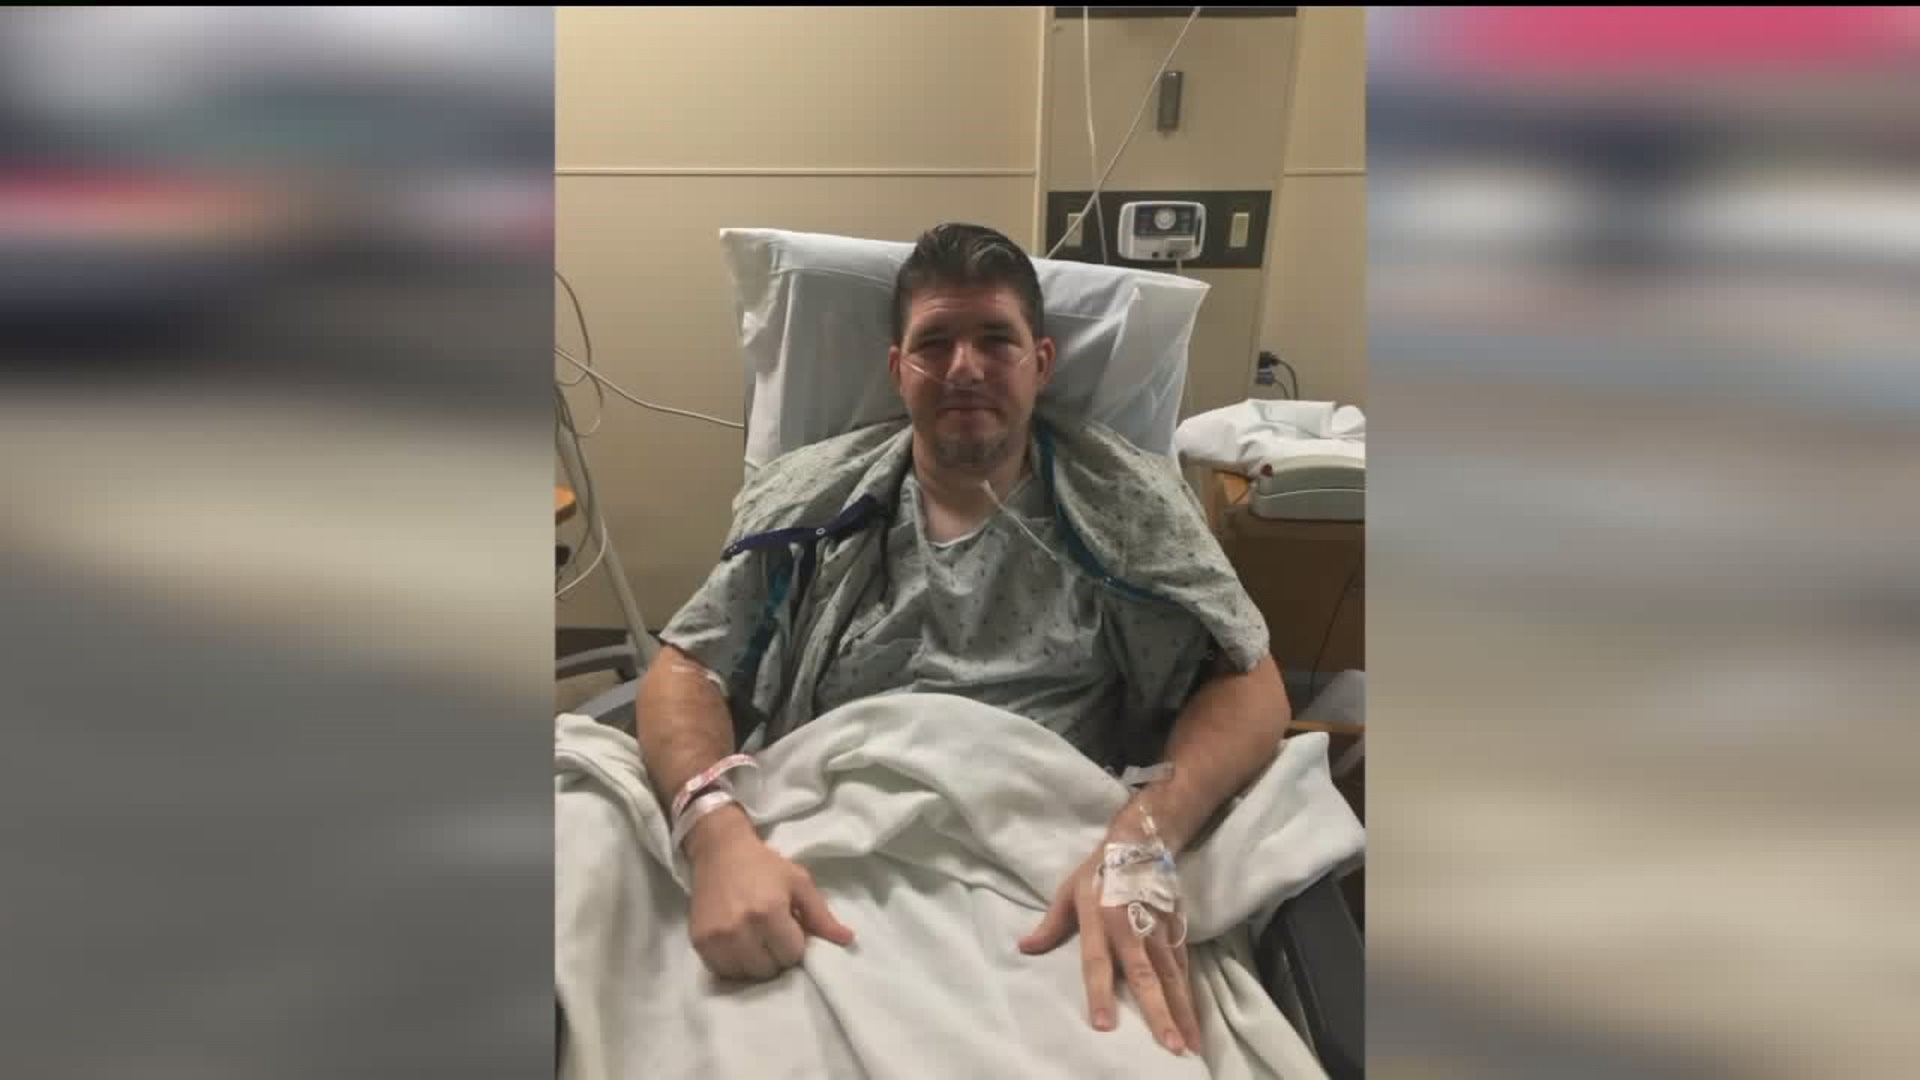 Family Seeks Justice, Support after Alleged DUI Crash